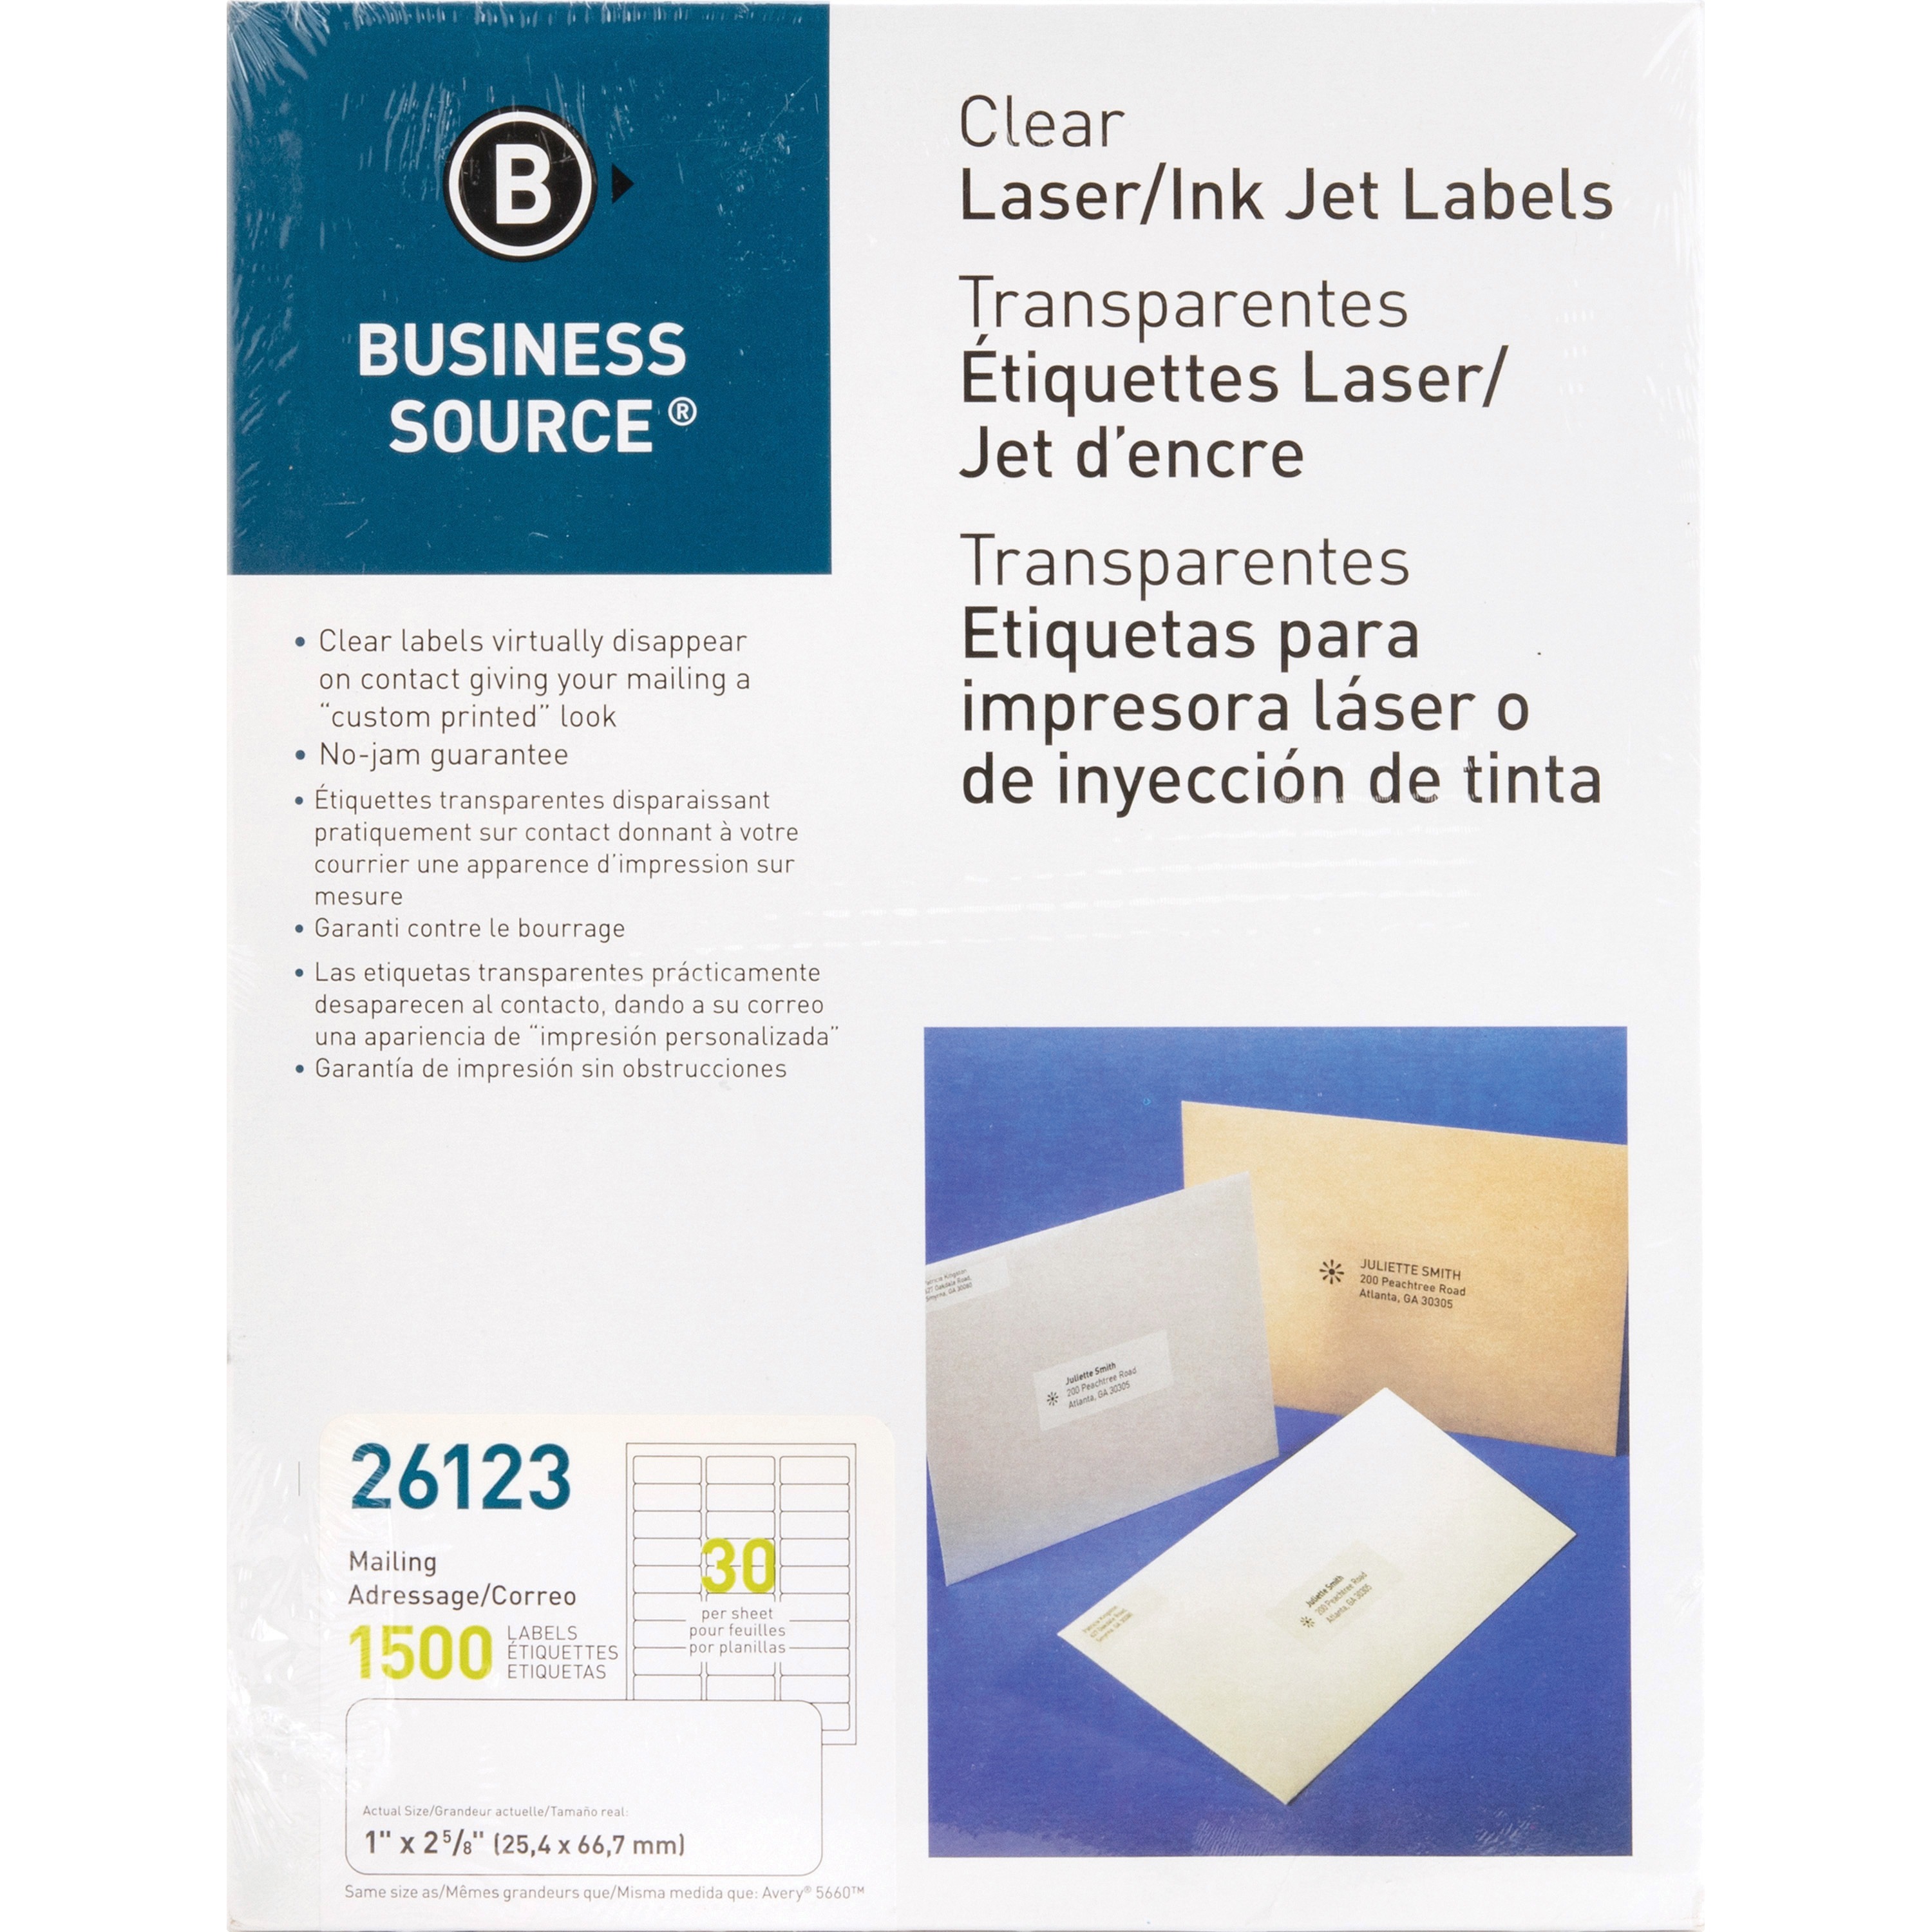 west-coast-office-supplies-office-supplies-labels-labeling-systems-labels-mailing